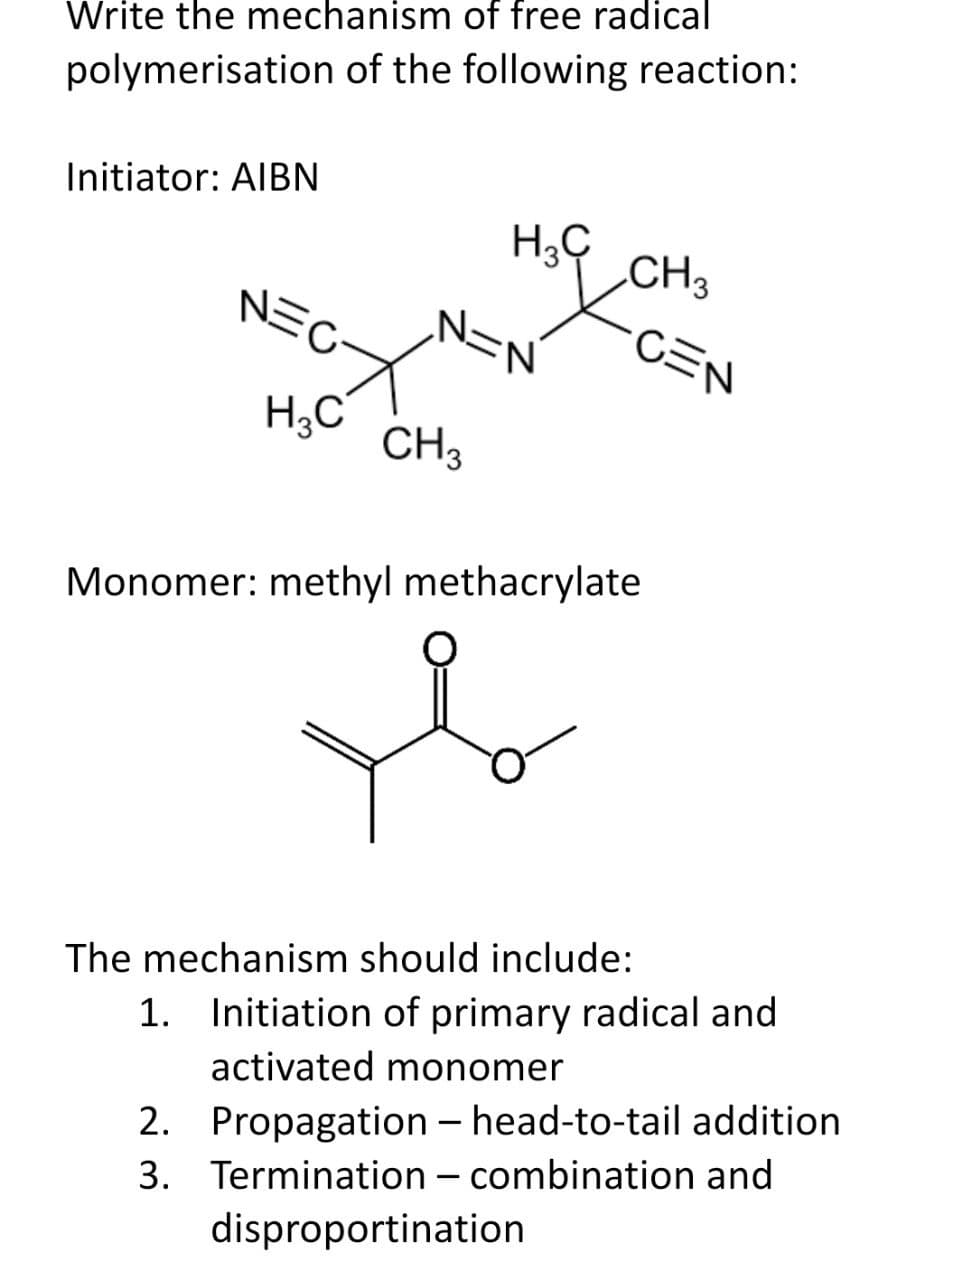 Write the mechanism of free radical
polymerisation of the following reaction:
Initiator: AIBN
EGYN=
H3C
CH 3
H3C
CH3
·CEN
Monomer: methyl methacrylate
The mechanism should include:
1. Initiation of primary radical and
activated monomer
2.
Propagation - head-to-tail addition
3. Termination - combination and
disproportination